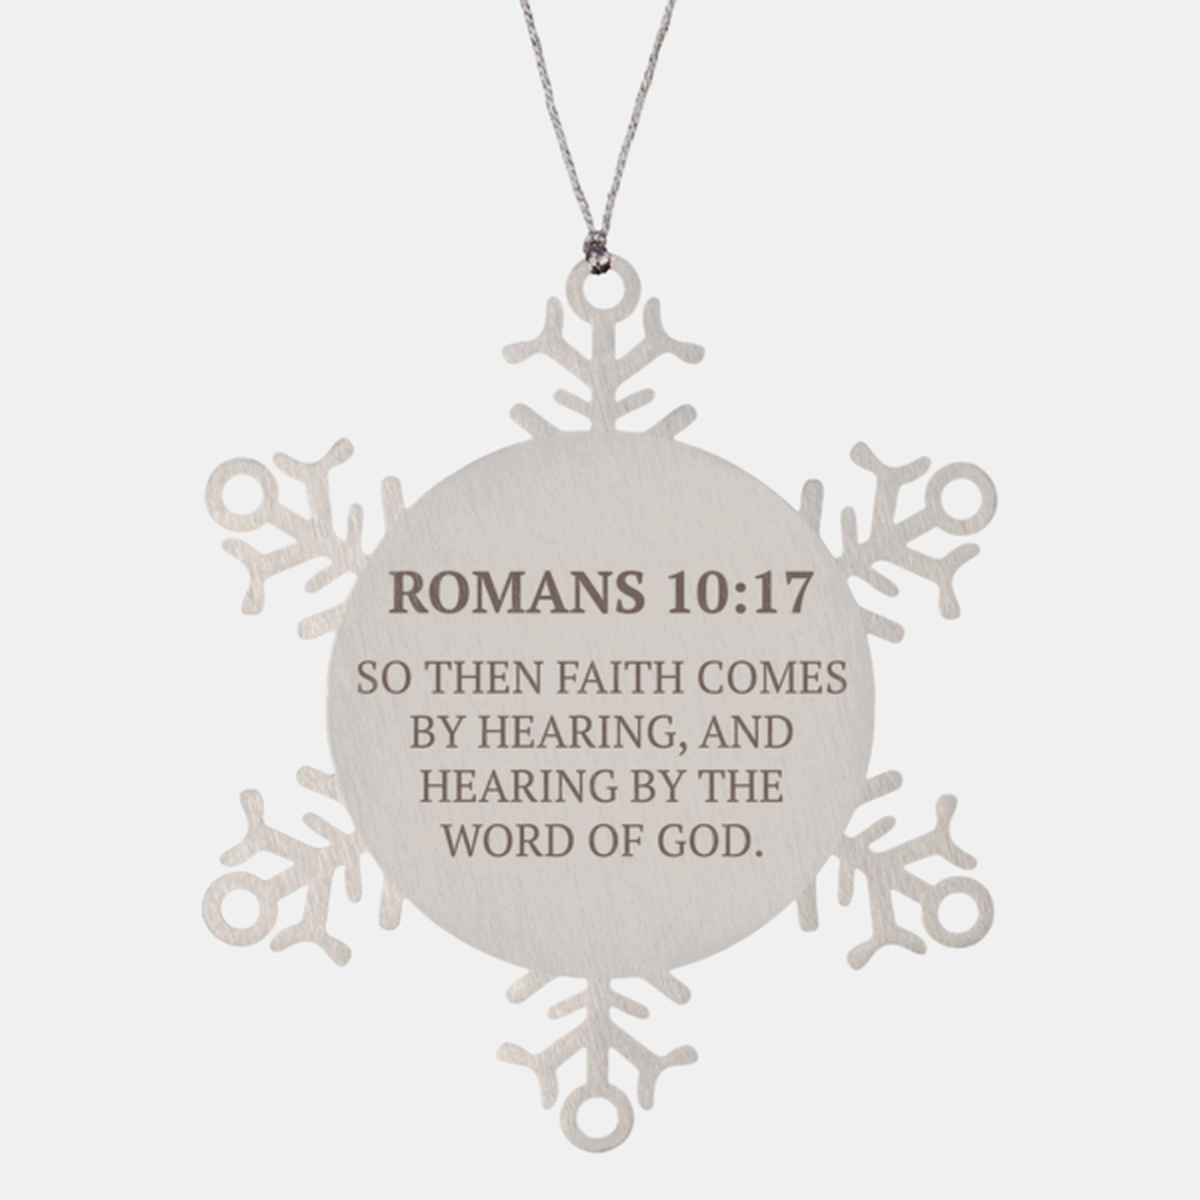 Christian Ornaments For Christmas Tree, So Then Faith Comes By Hearing, Religious Christmas Decorations, Scripture Ornaments Gifts, Bible Verse Ornament